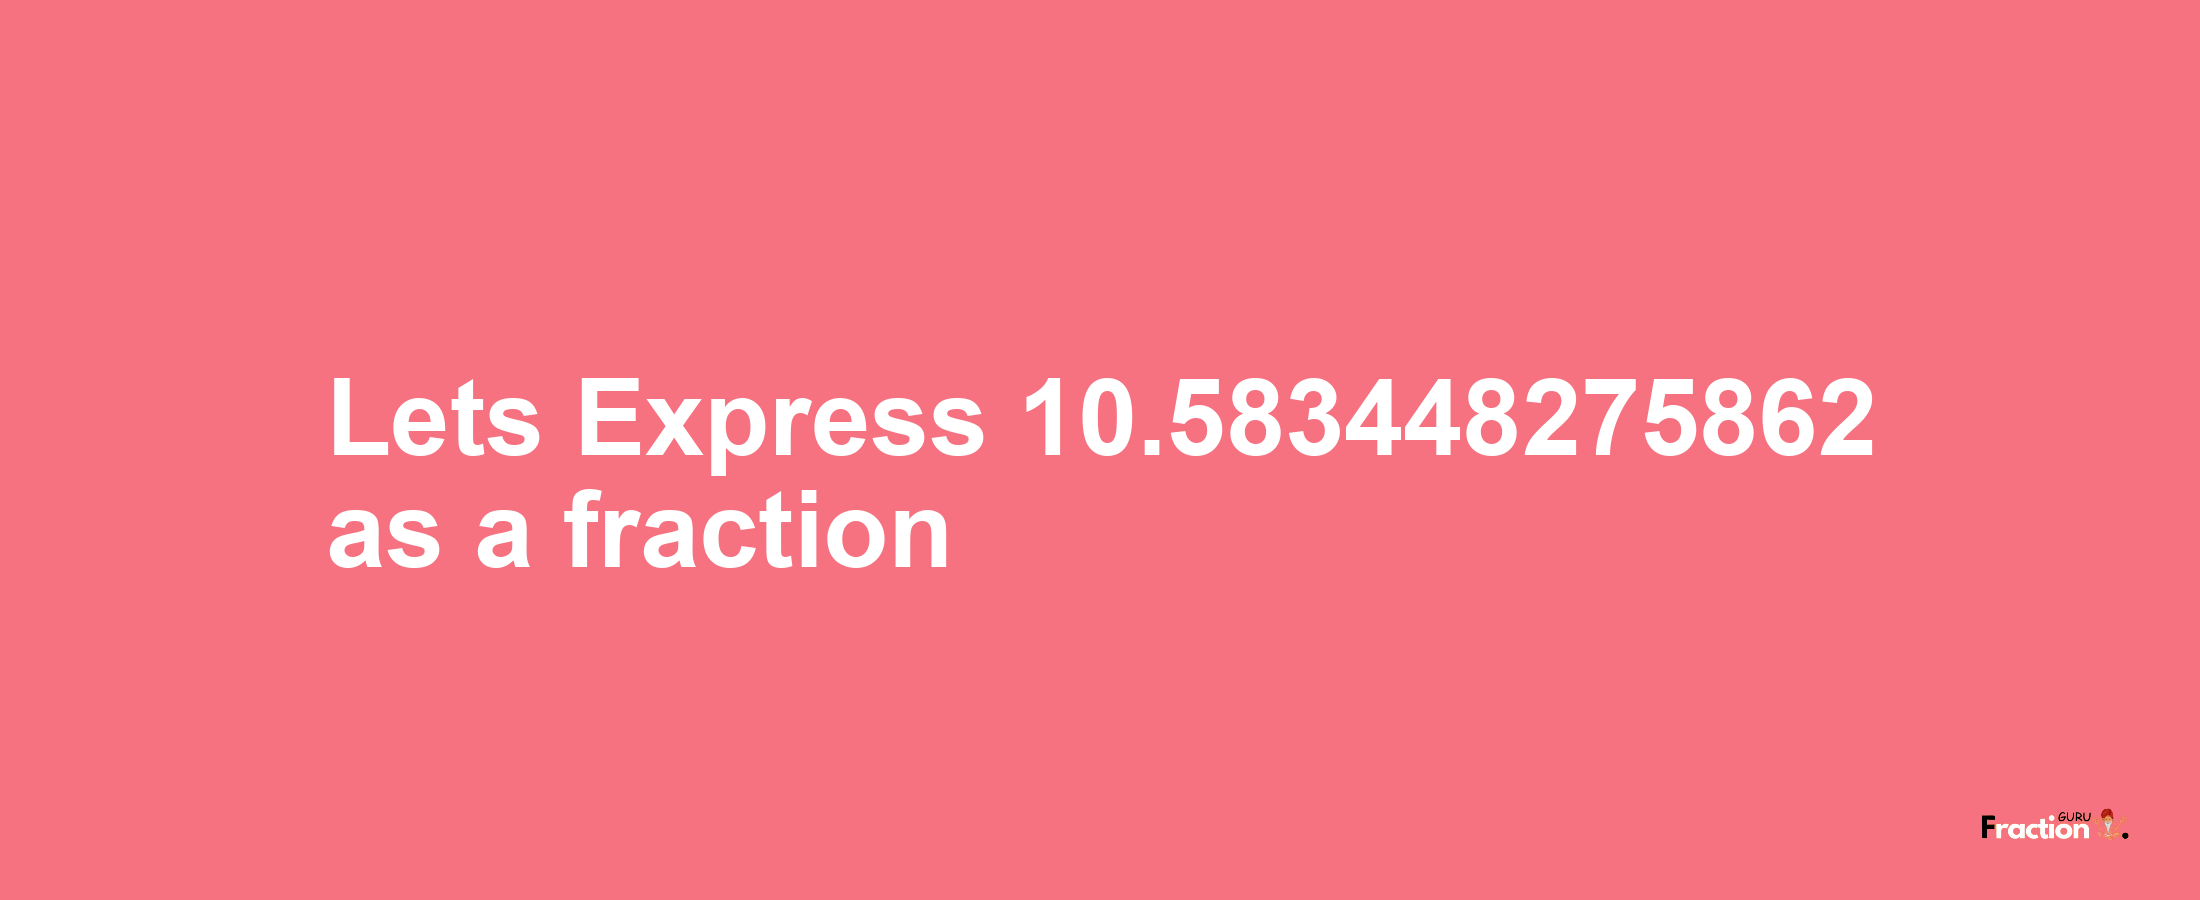 Lets Express 10.583448275862 as afraction